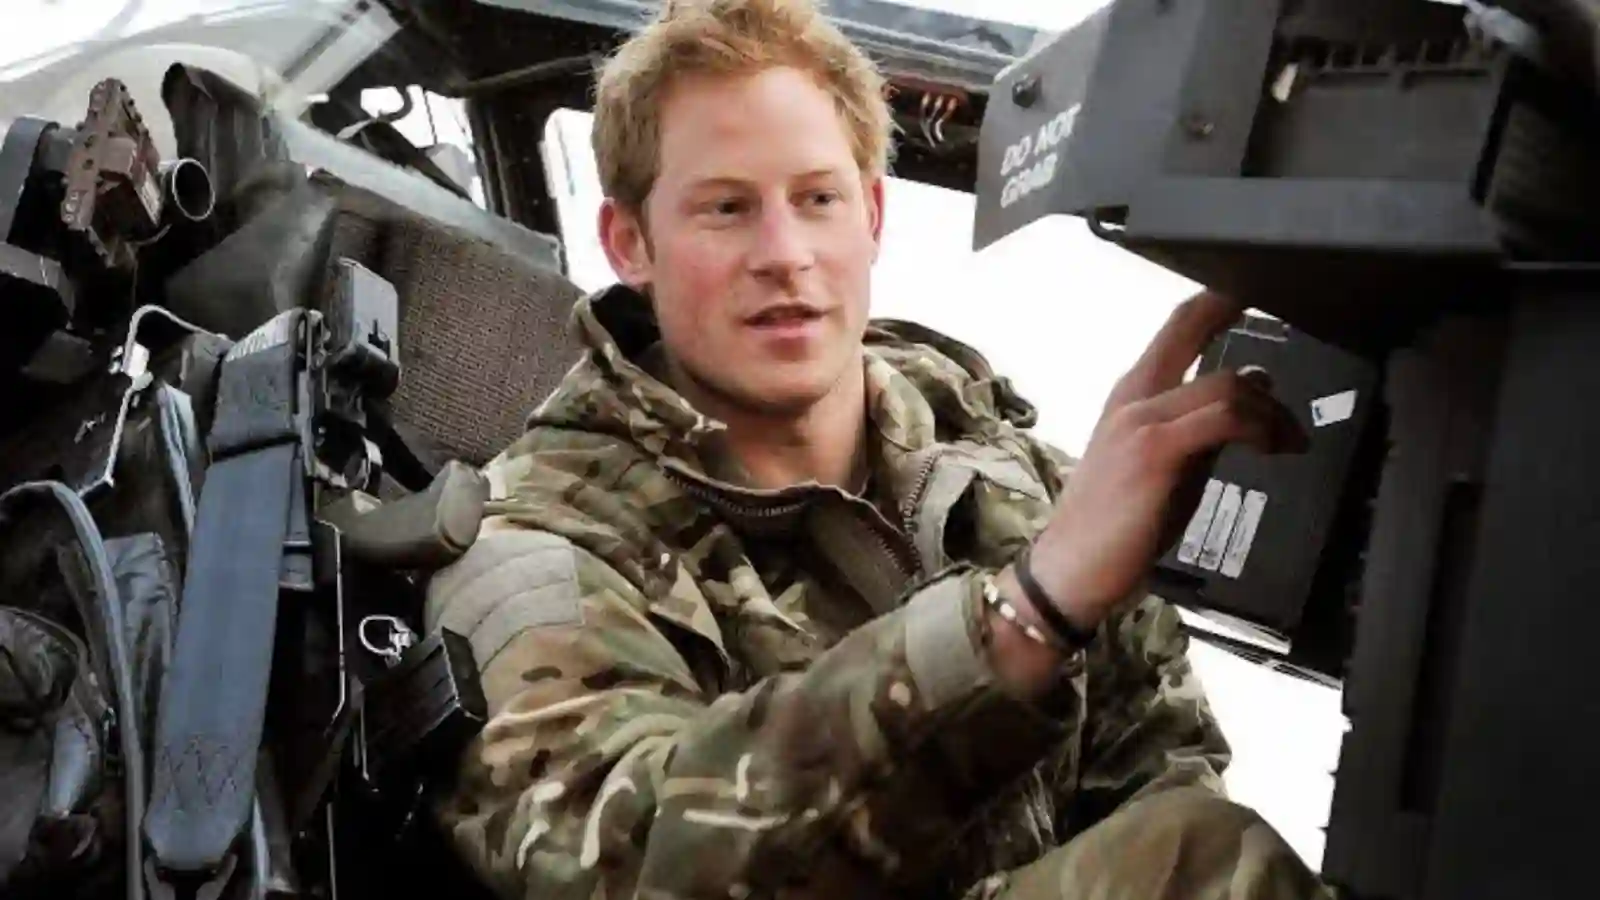 Prince Harry during his military service